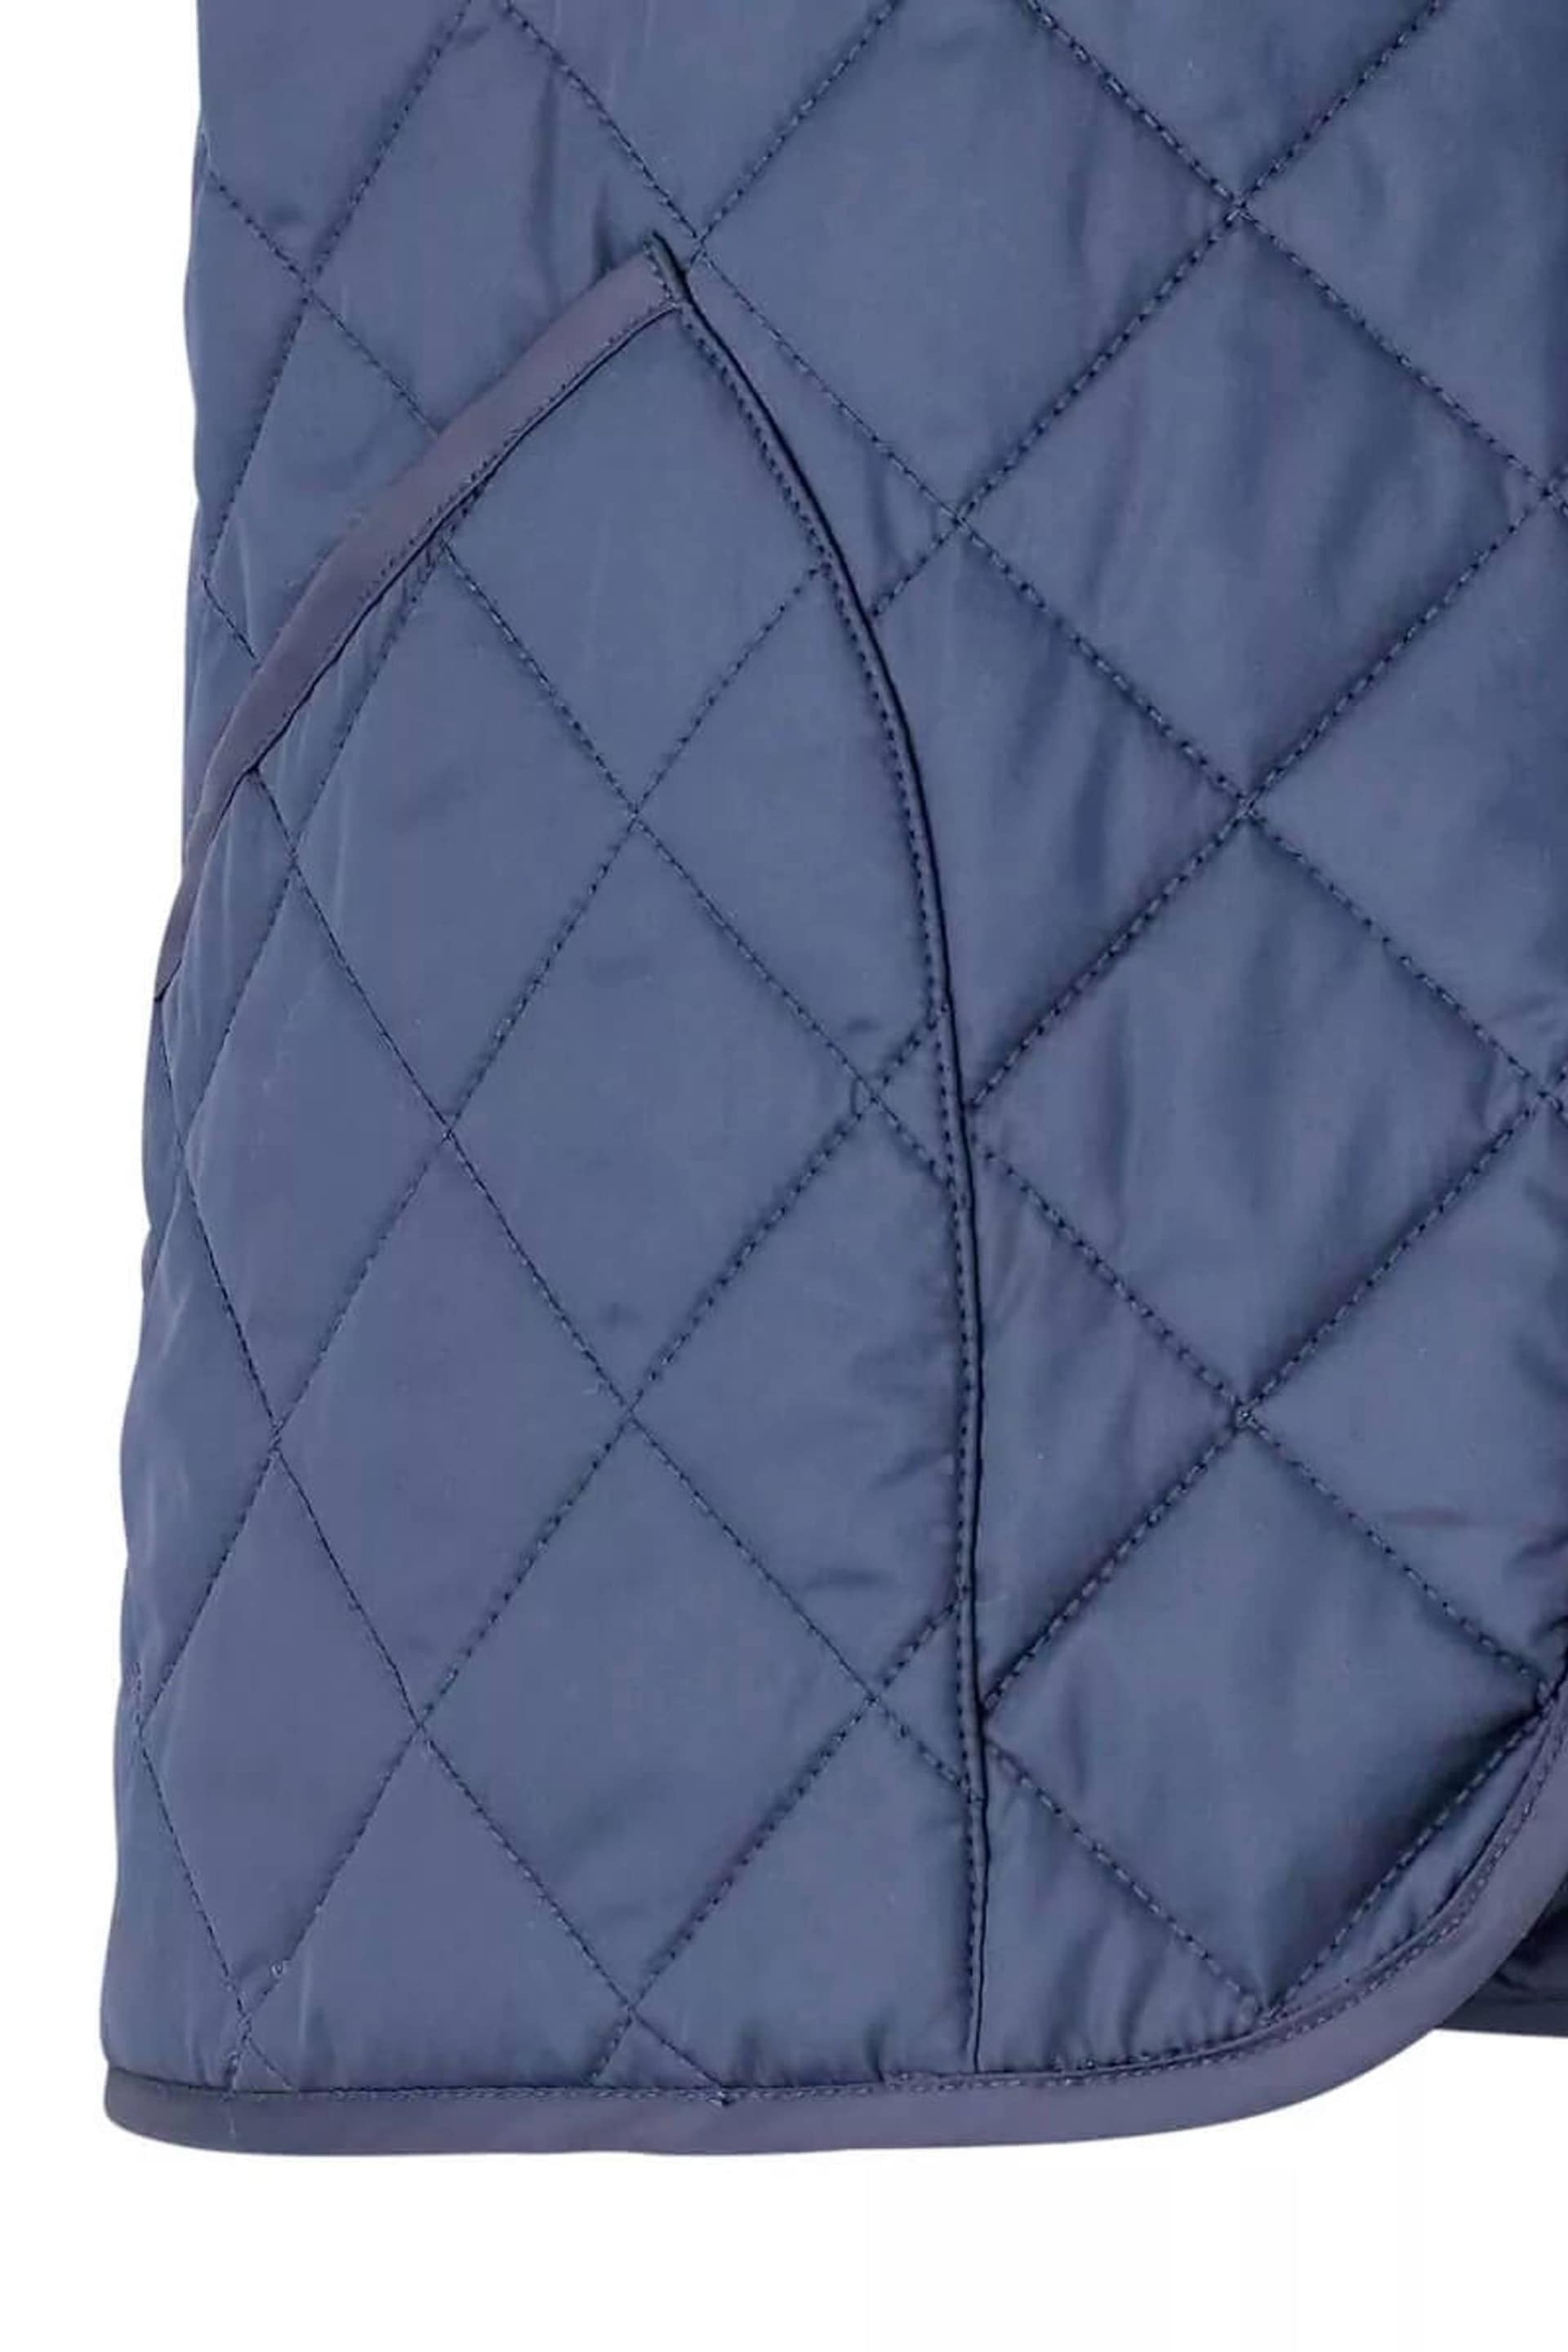 Savile Row Company Navy Blue Quilted Gilet - Image 3 of 5